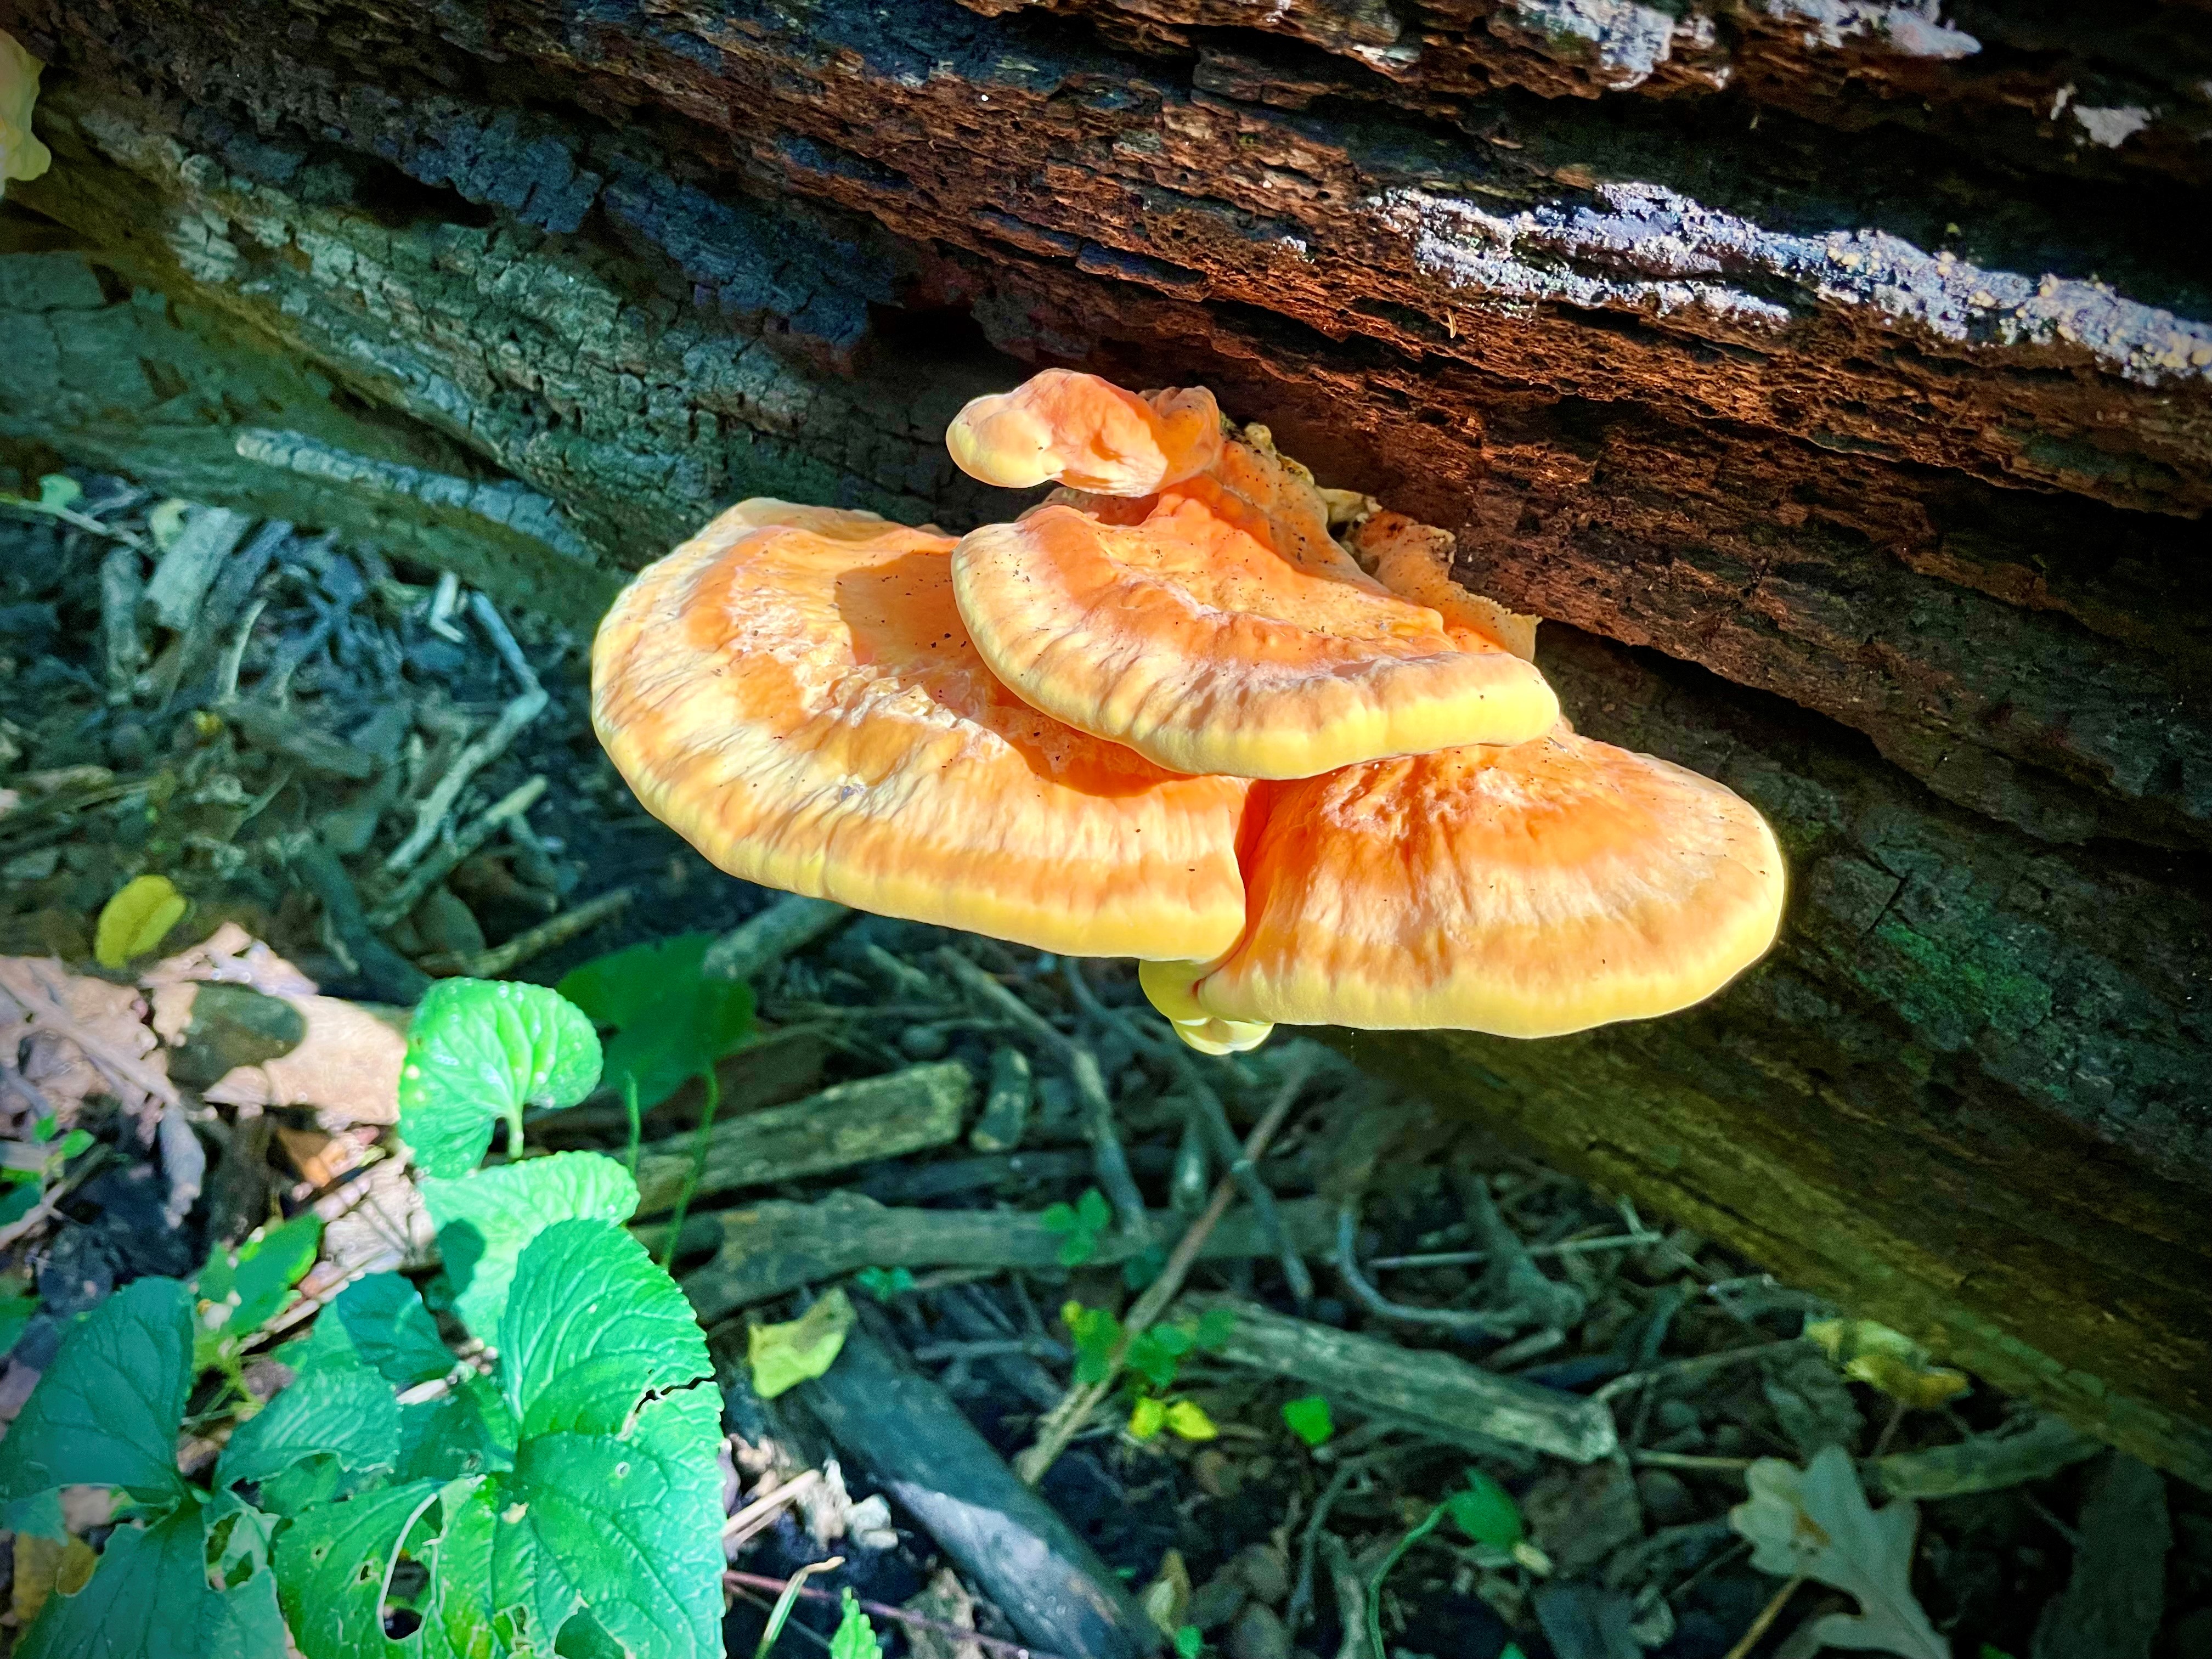 A chicken-of-the-woods mushroom grows on a tree trunk.